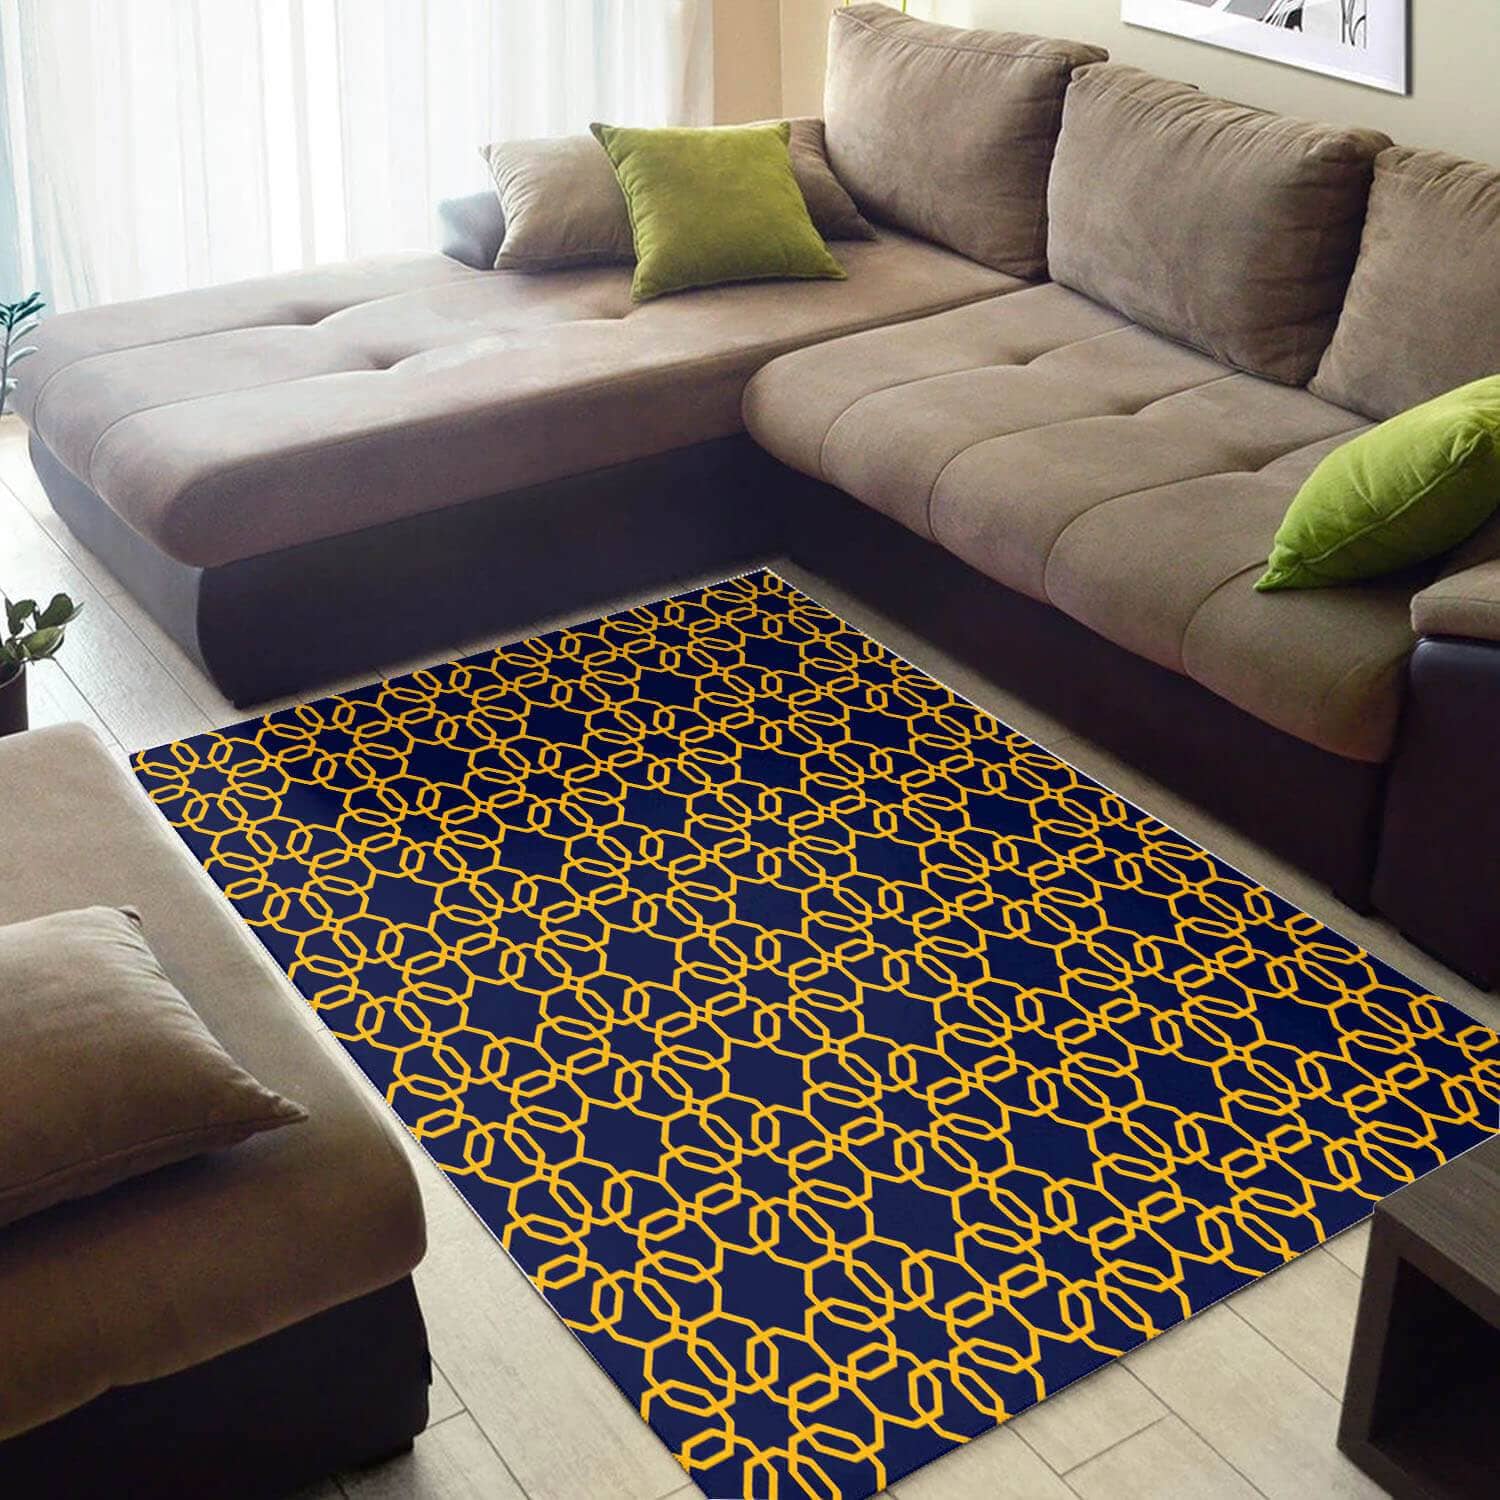 Cool African Style Attractive Print Afrocentric Pattern Art Large Carpet House Rug